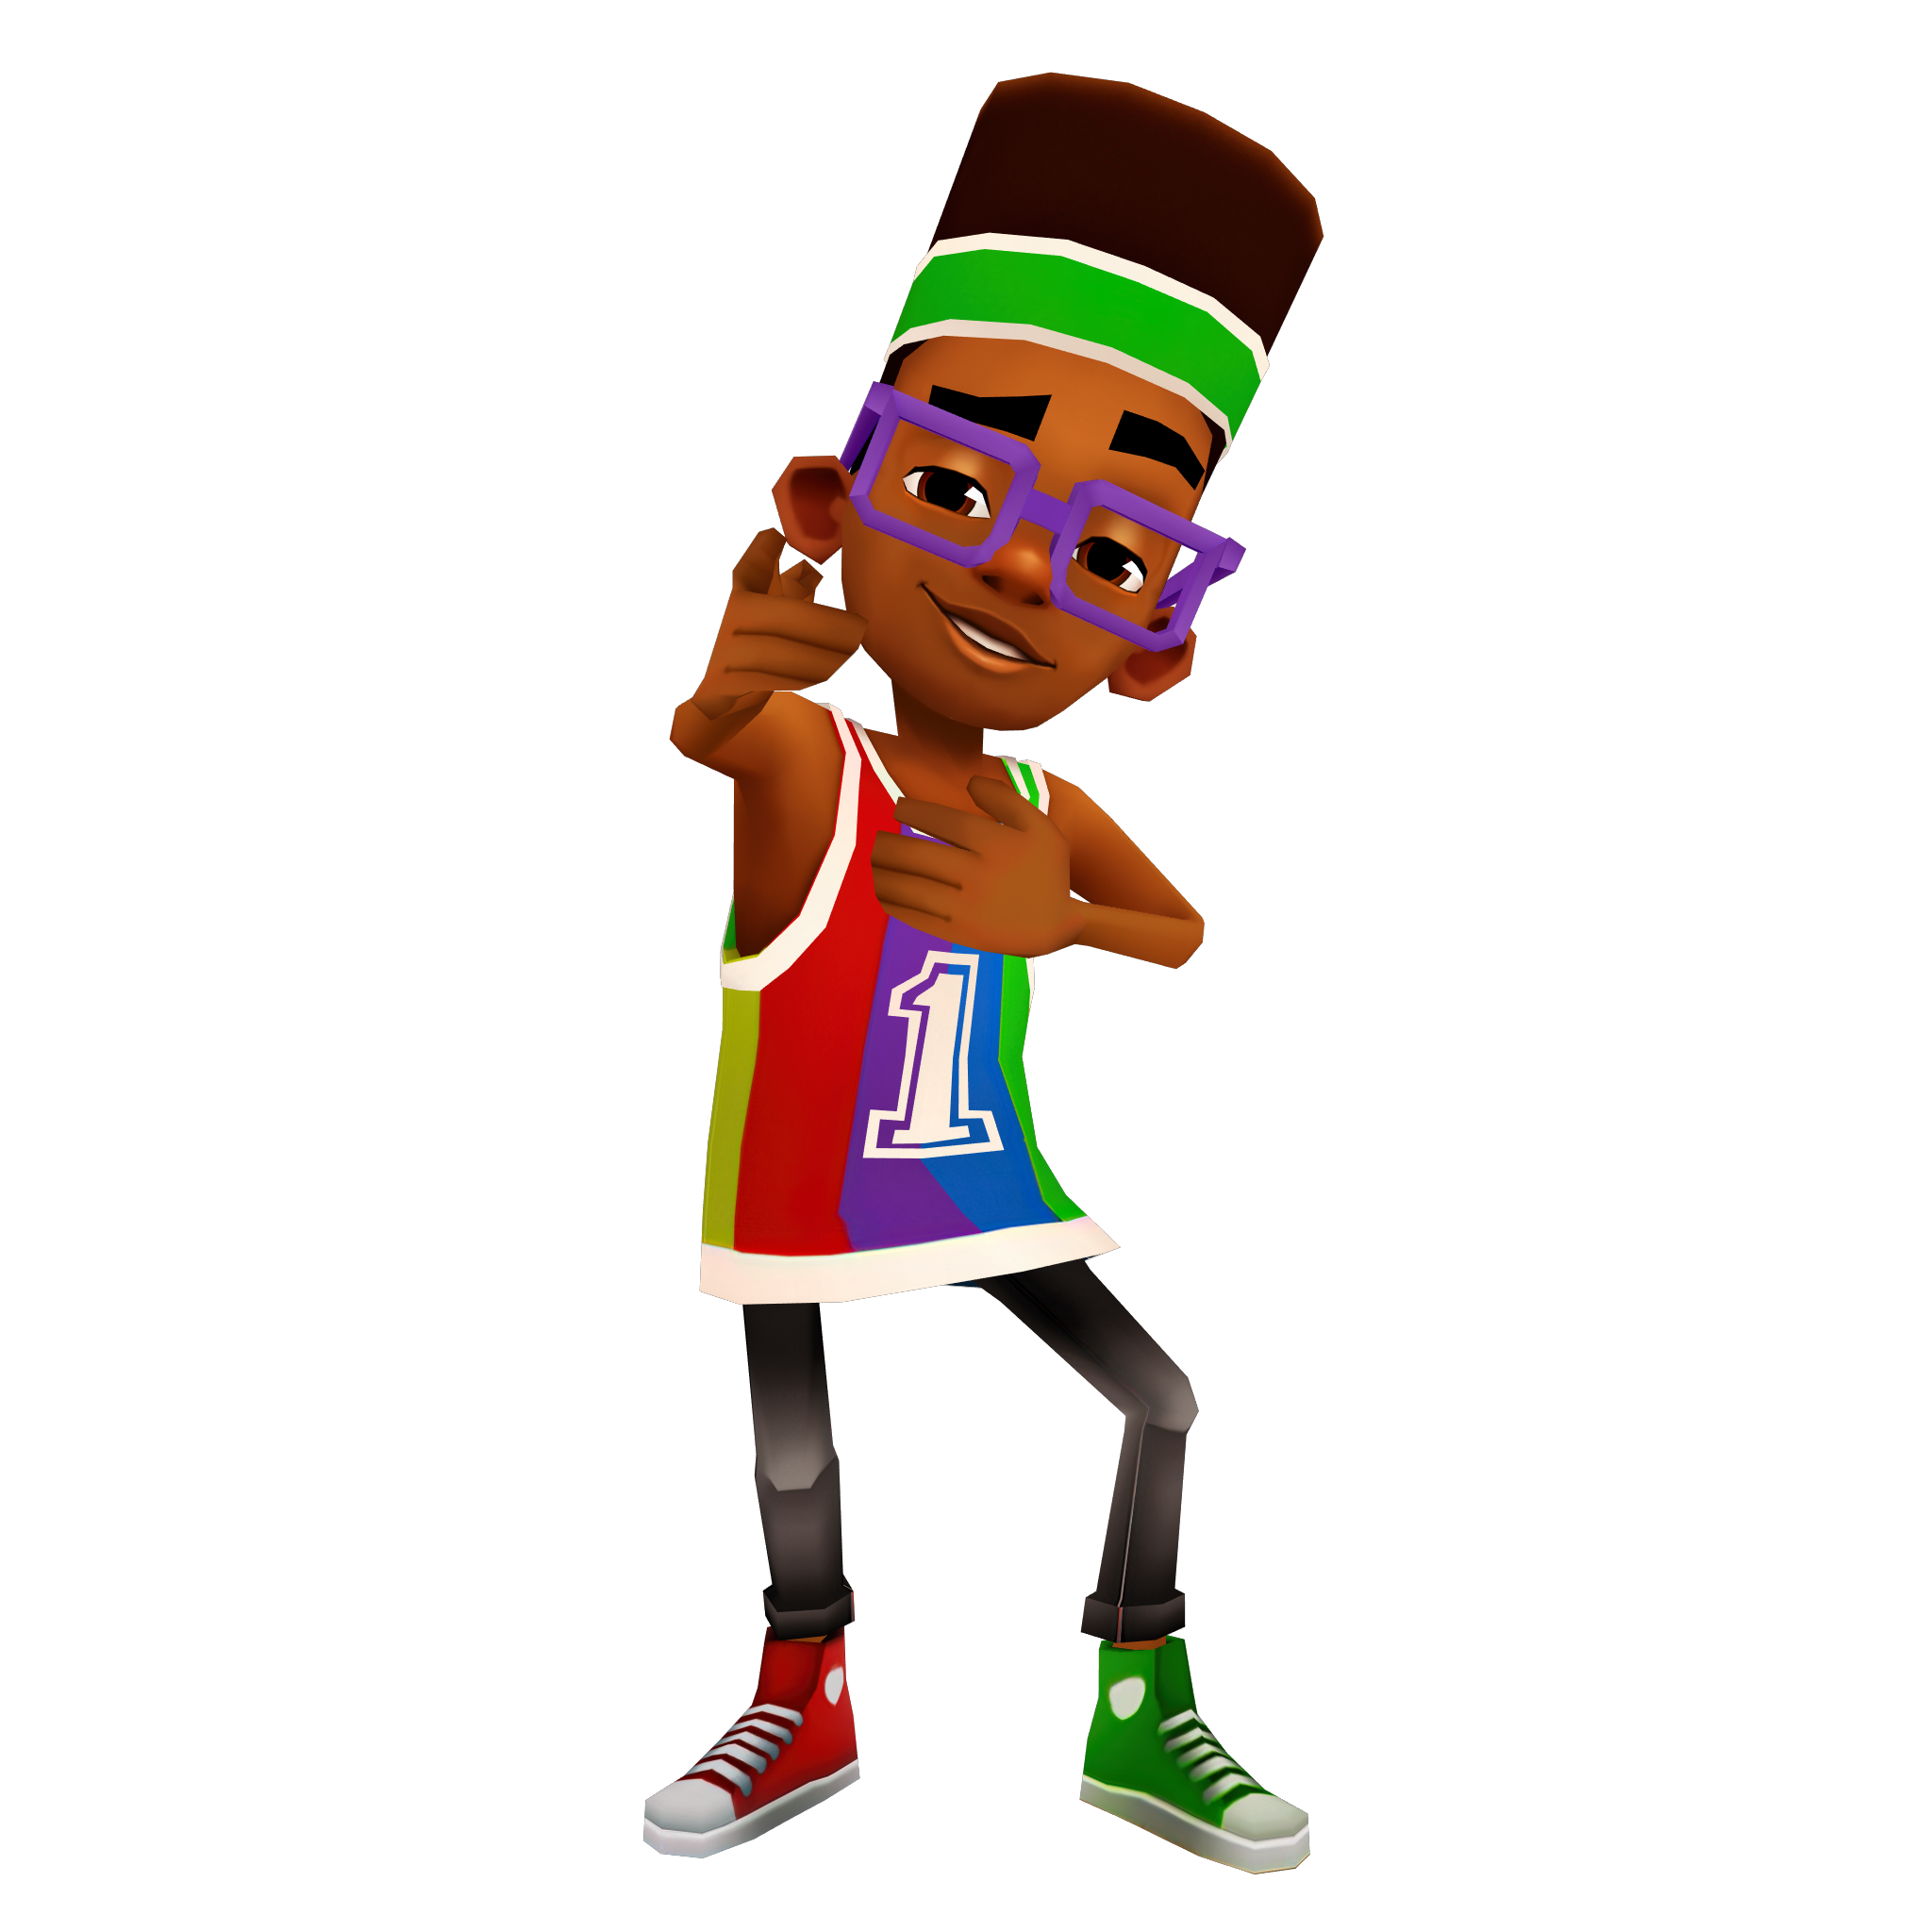 subway surfers pride🏳️‍🌈 on X: Fresh sport outfit pride icons, he has a  basketball game tomorrow❤️ icons free to use  / X